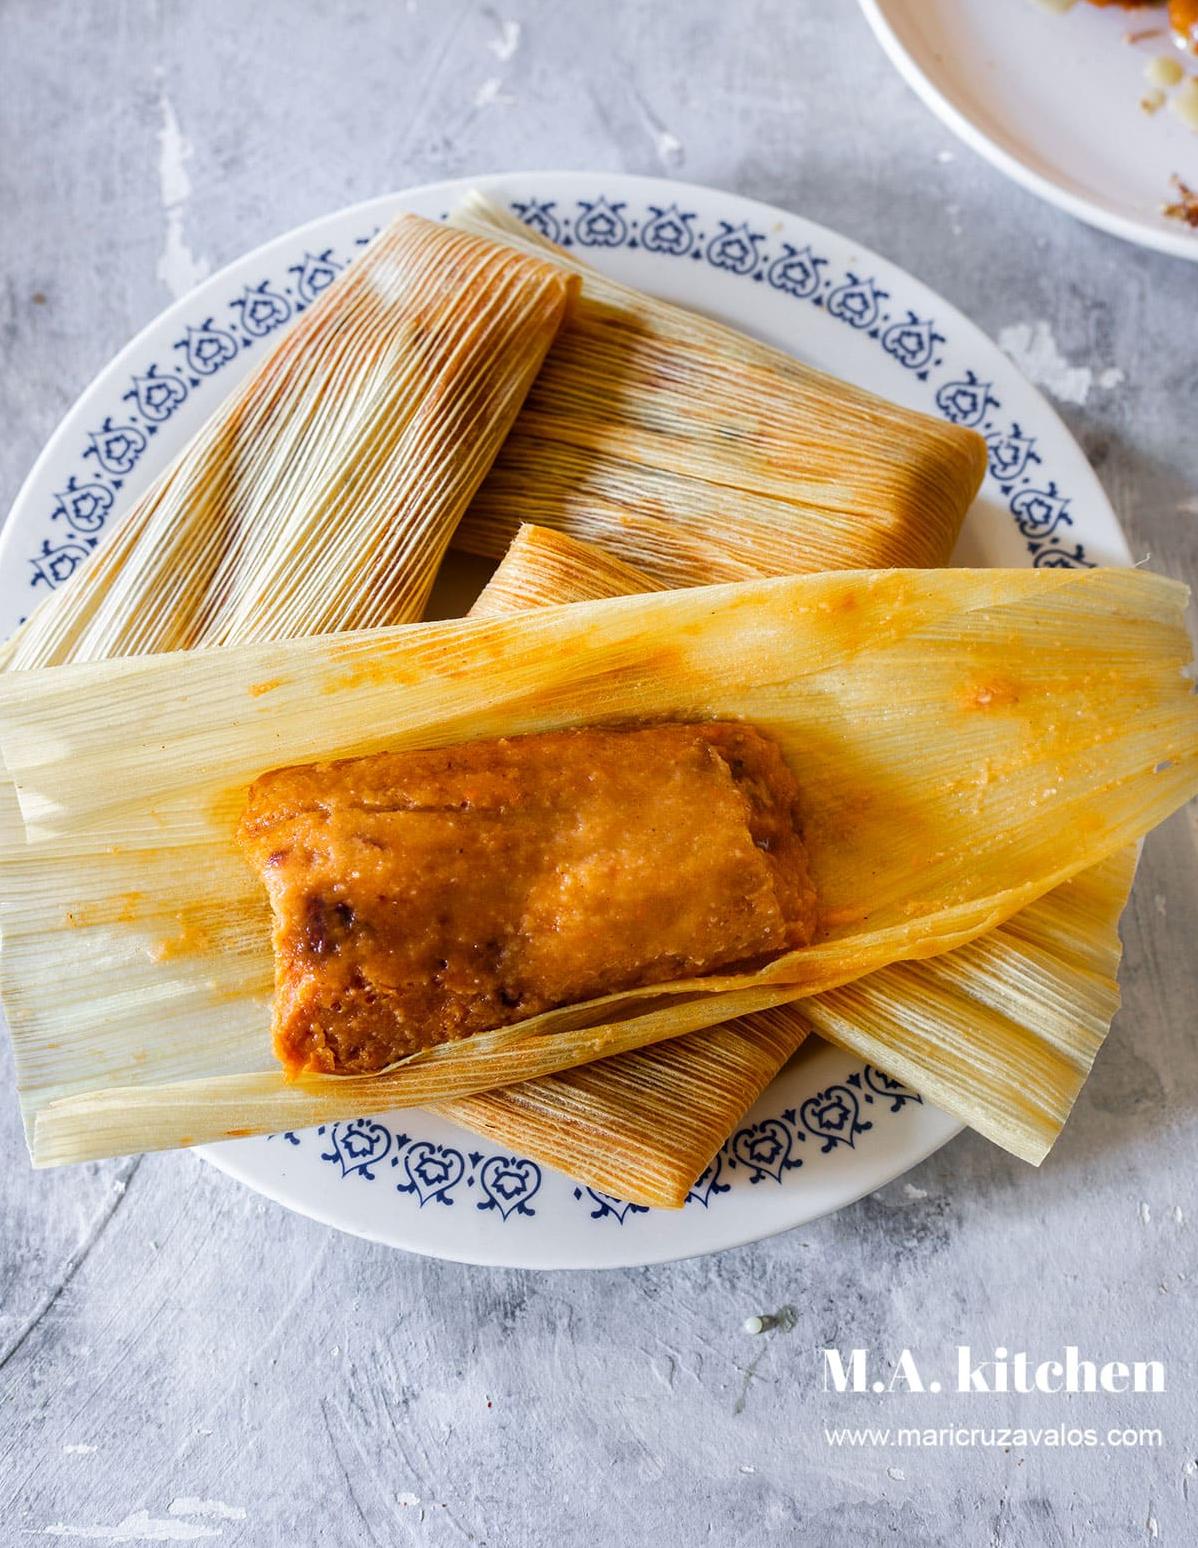  Snuggle up with a warm blanket and a plate of these Pumpkin Tamales for ultimate autumn coziness.